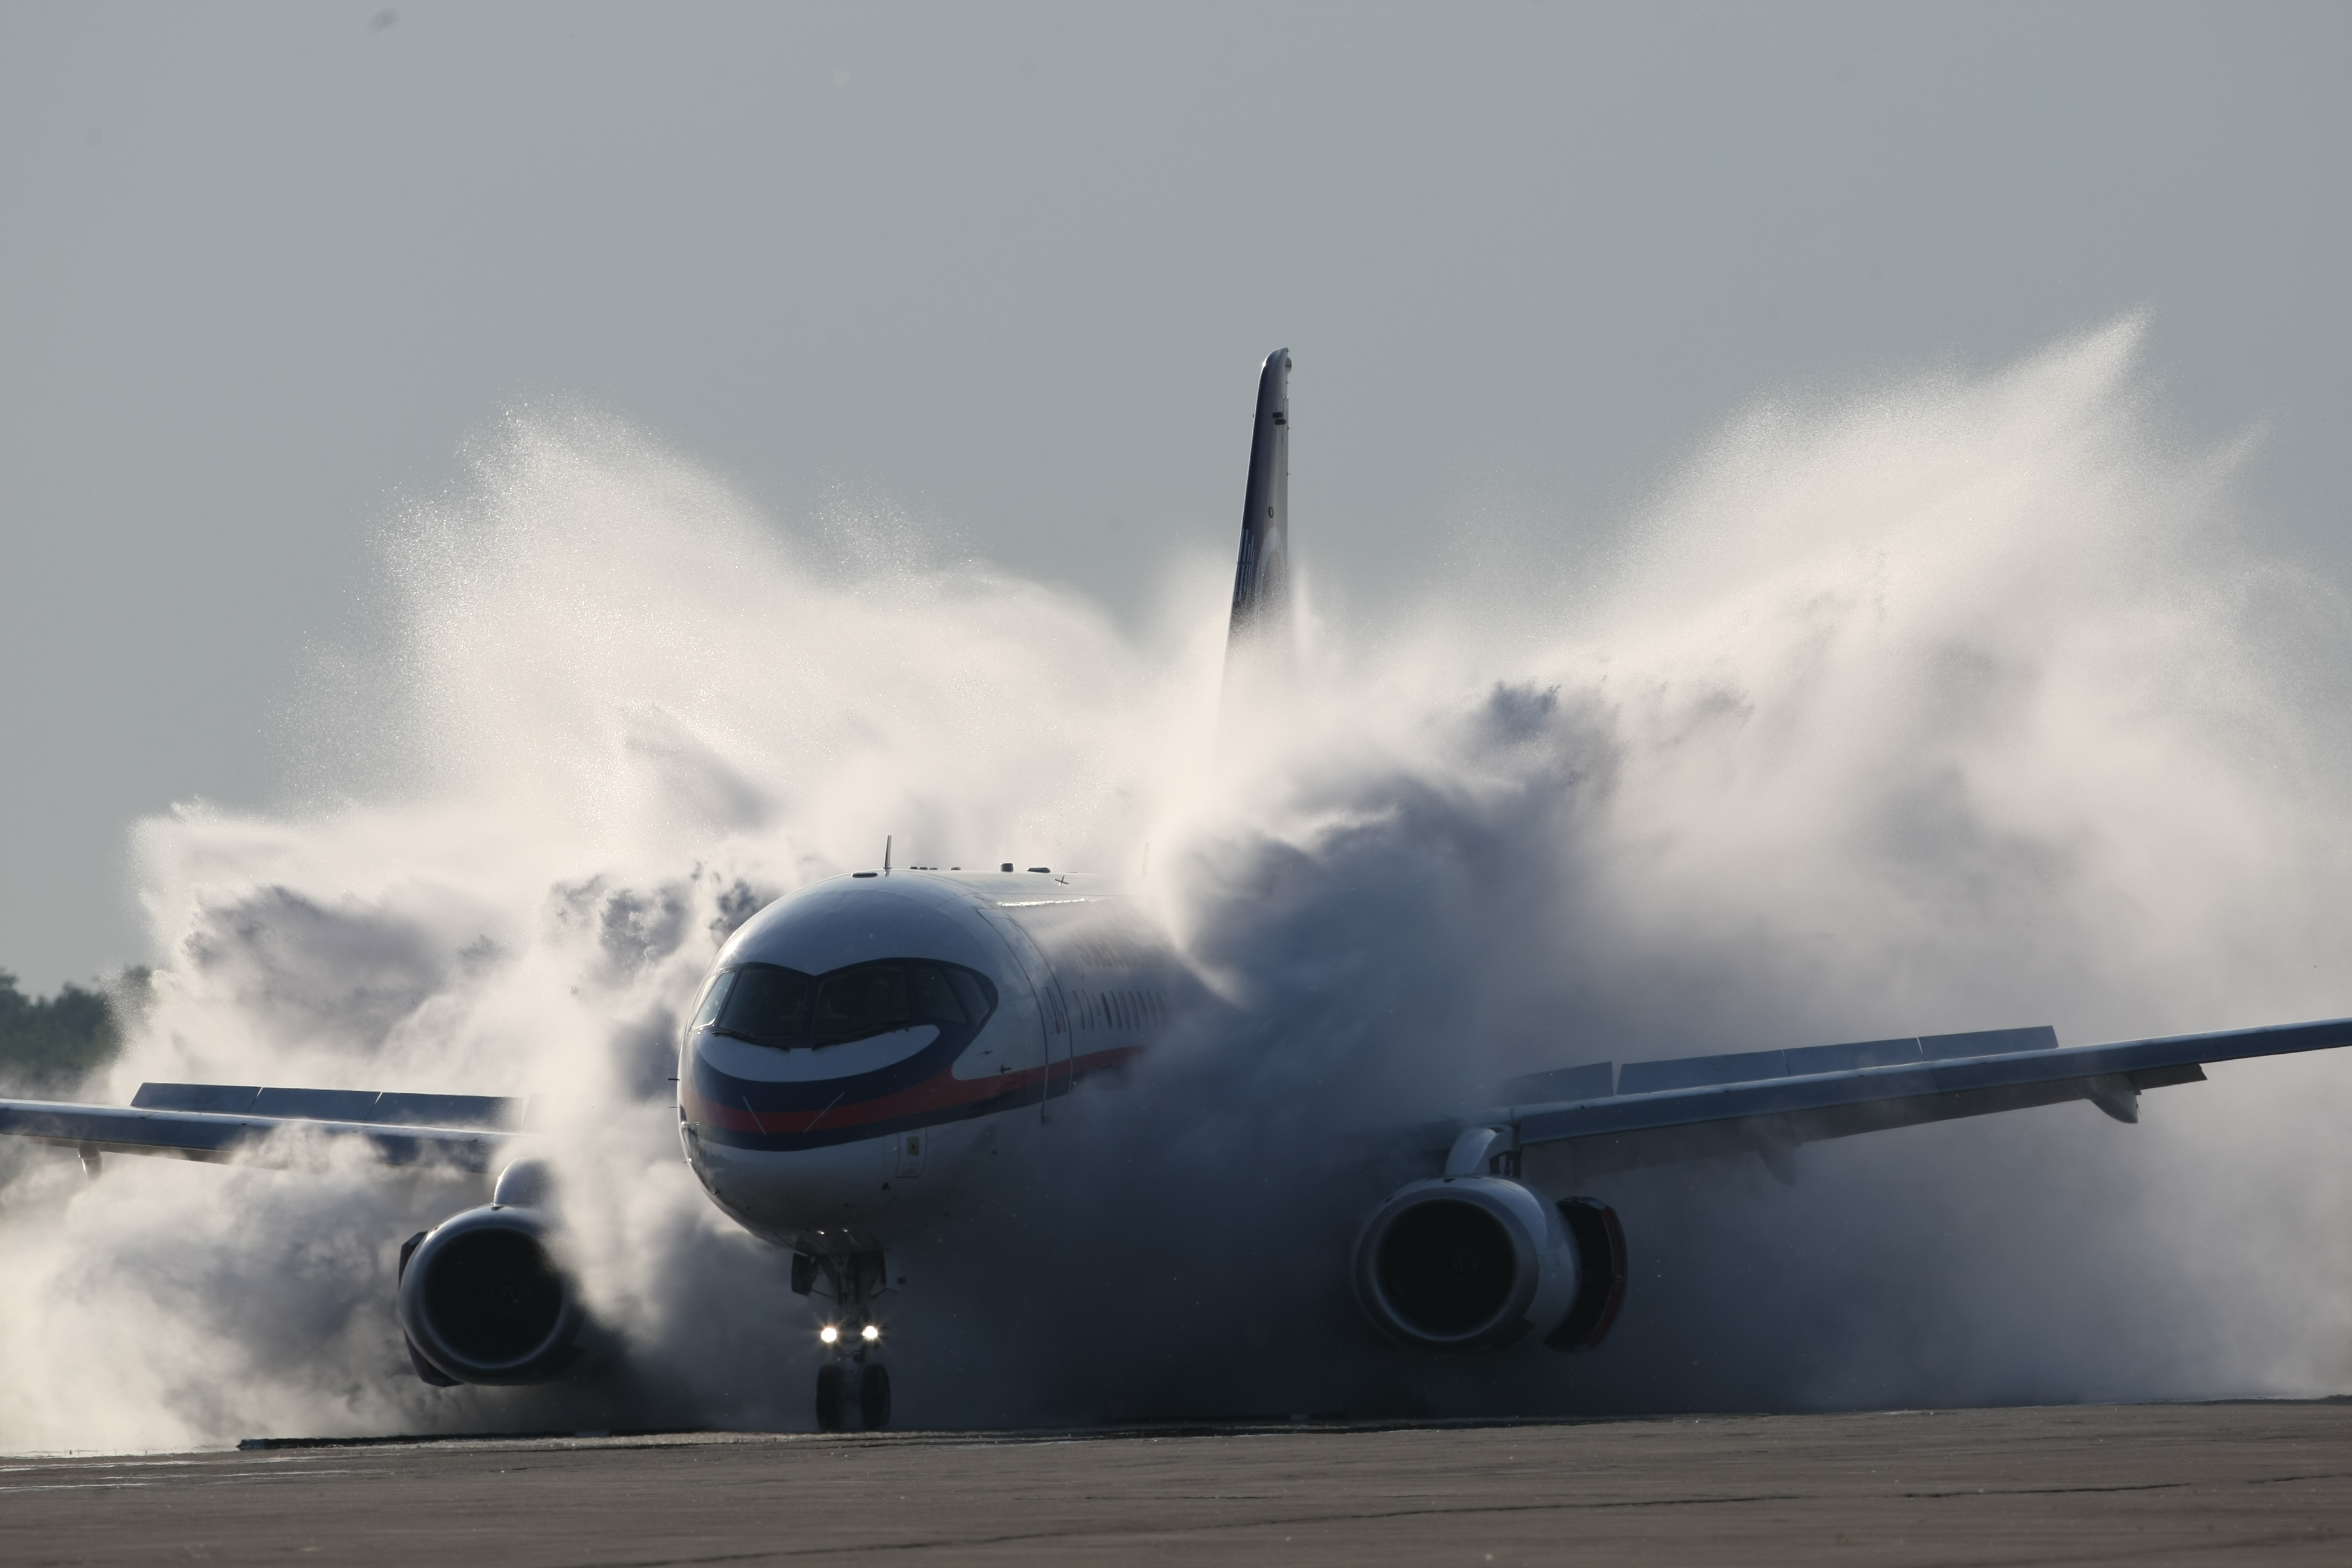 65802 download wallpaper miscellanea, smoke, miscellaneous, dust, plane, airplane, dry, superjet, 100 screensavers and pictures for free